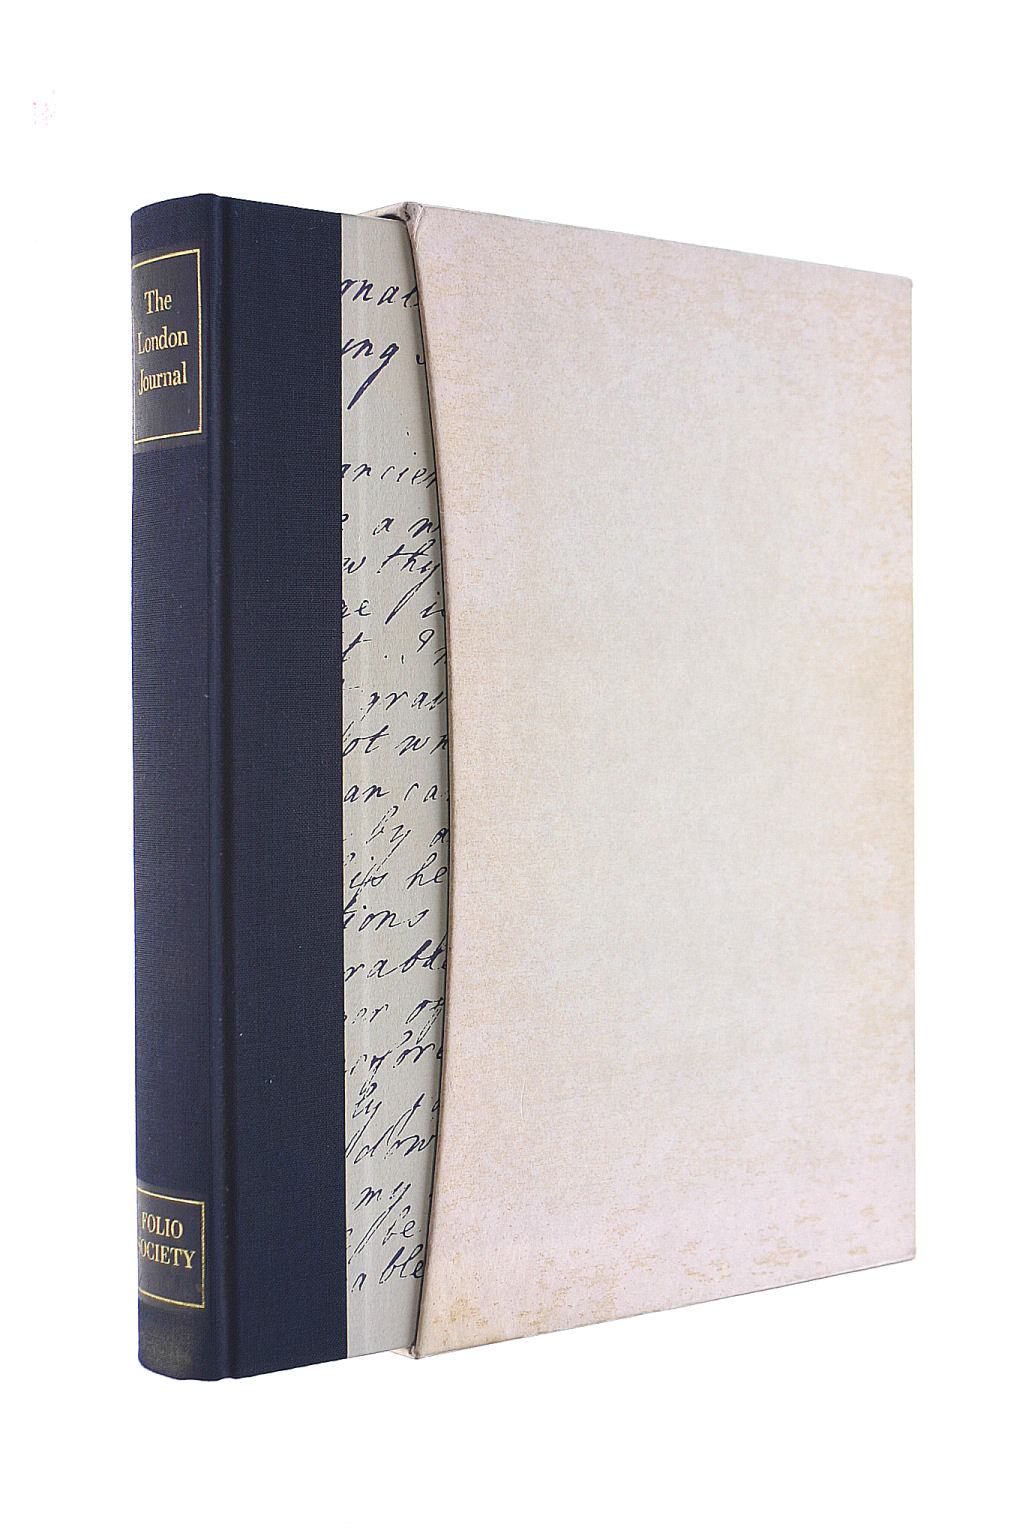 JAMES BOSWELL; FREDERICK A. POTTLE [EDITOR] - Boswell's London Journal 1762-63